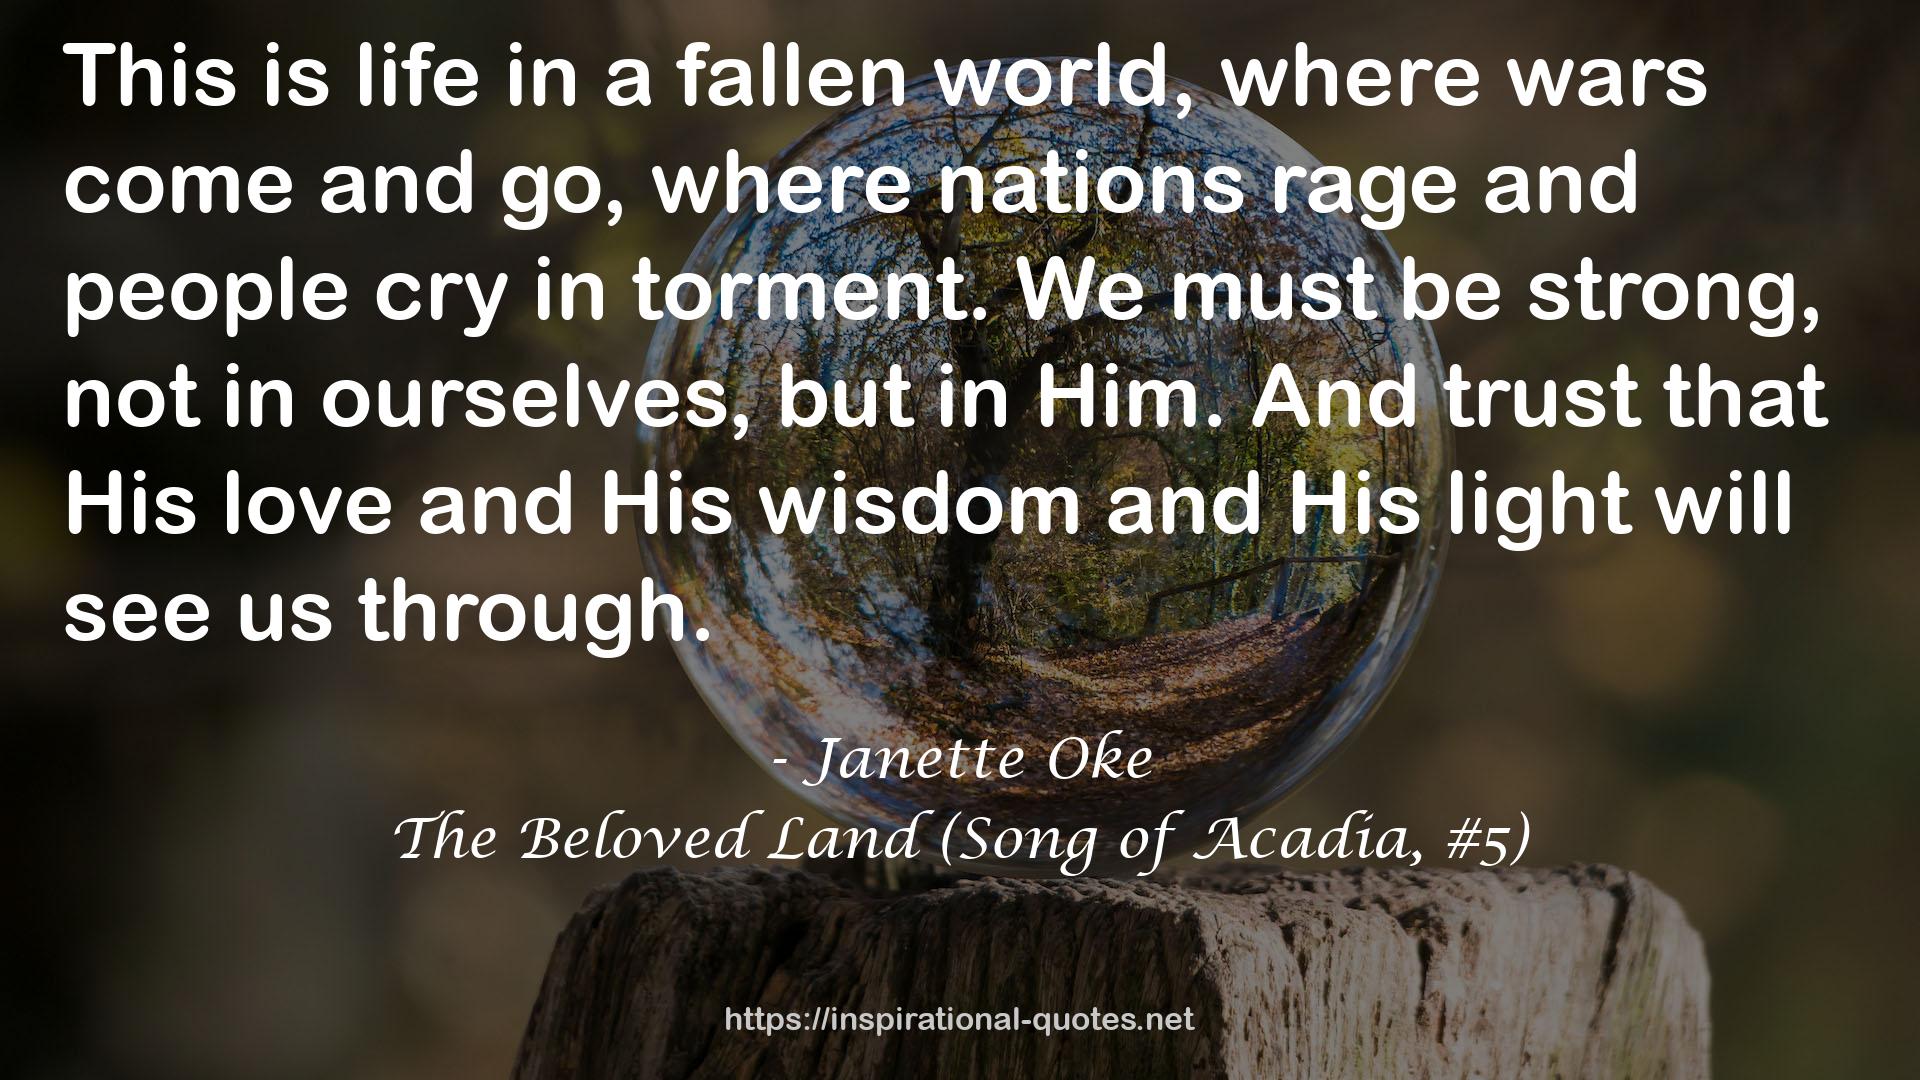 The Beloved Land (Song of Acadia, #5) QUOTES